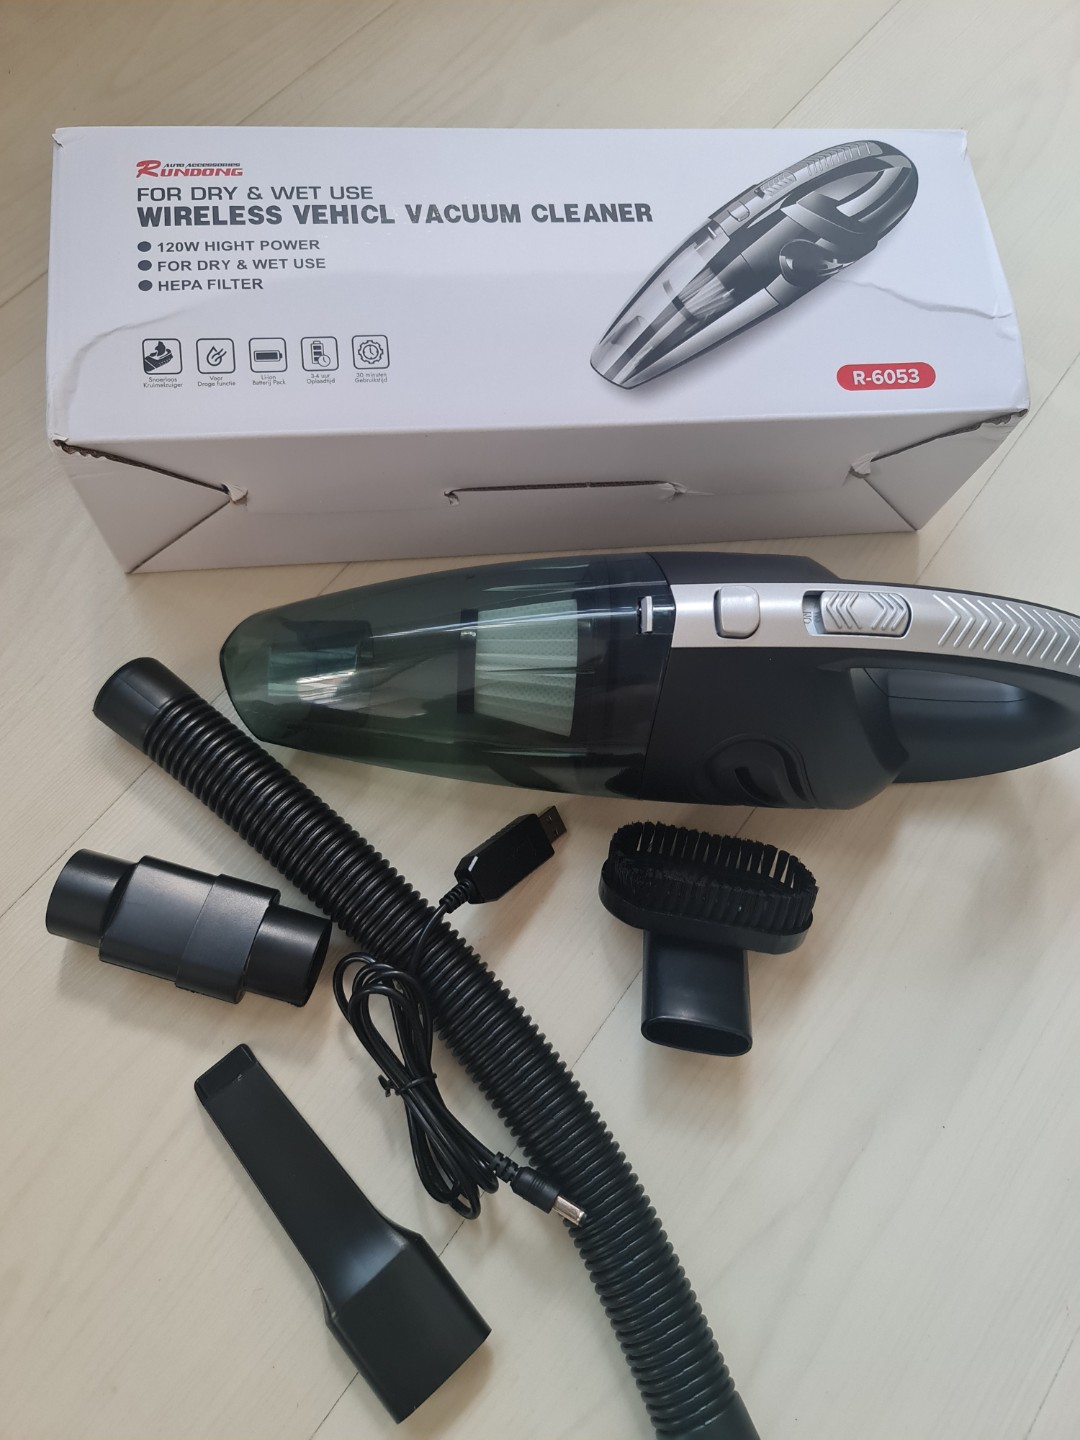 SG SHOP) Cordless Handheld Vacuum Cleaner 120W Powerful Portable Car Vacuum  Cleaner Mini Hand Held Wet and Dry Vacuum [SHIPS BY 05 MAY 2022]